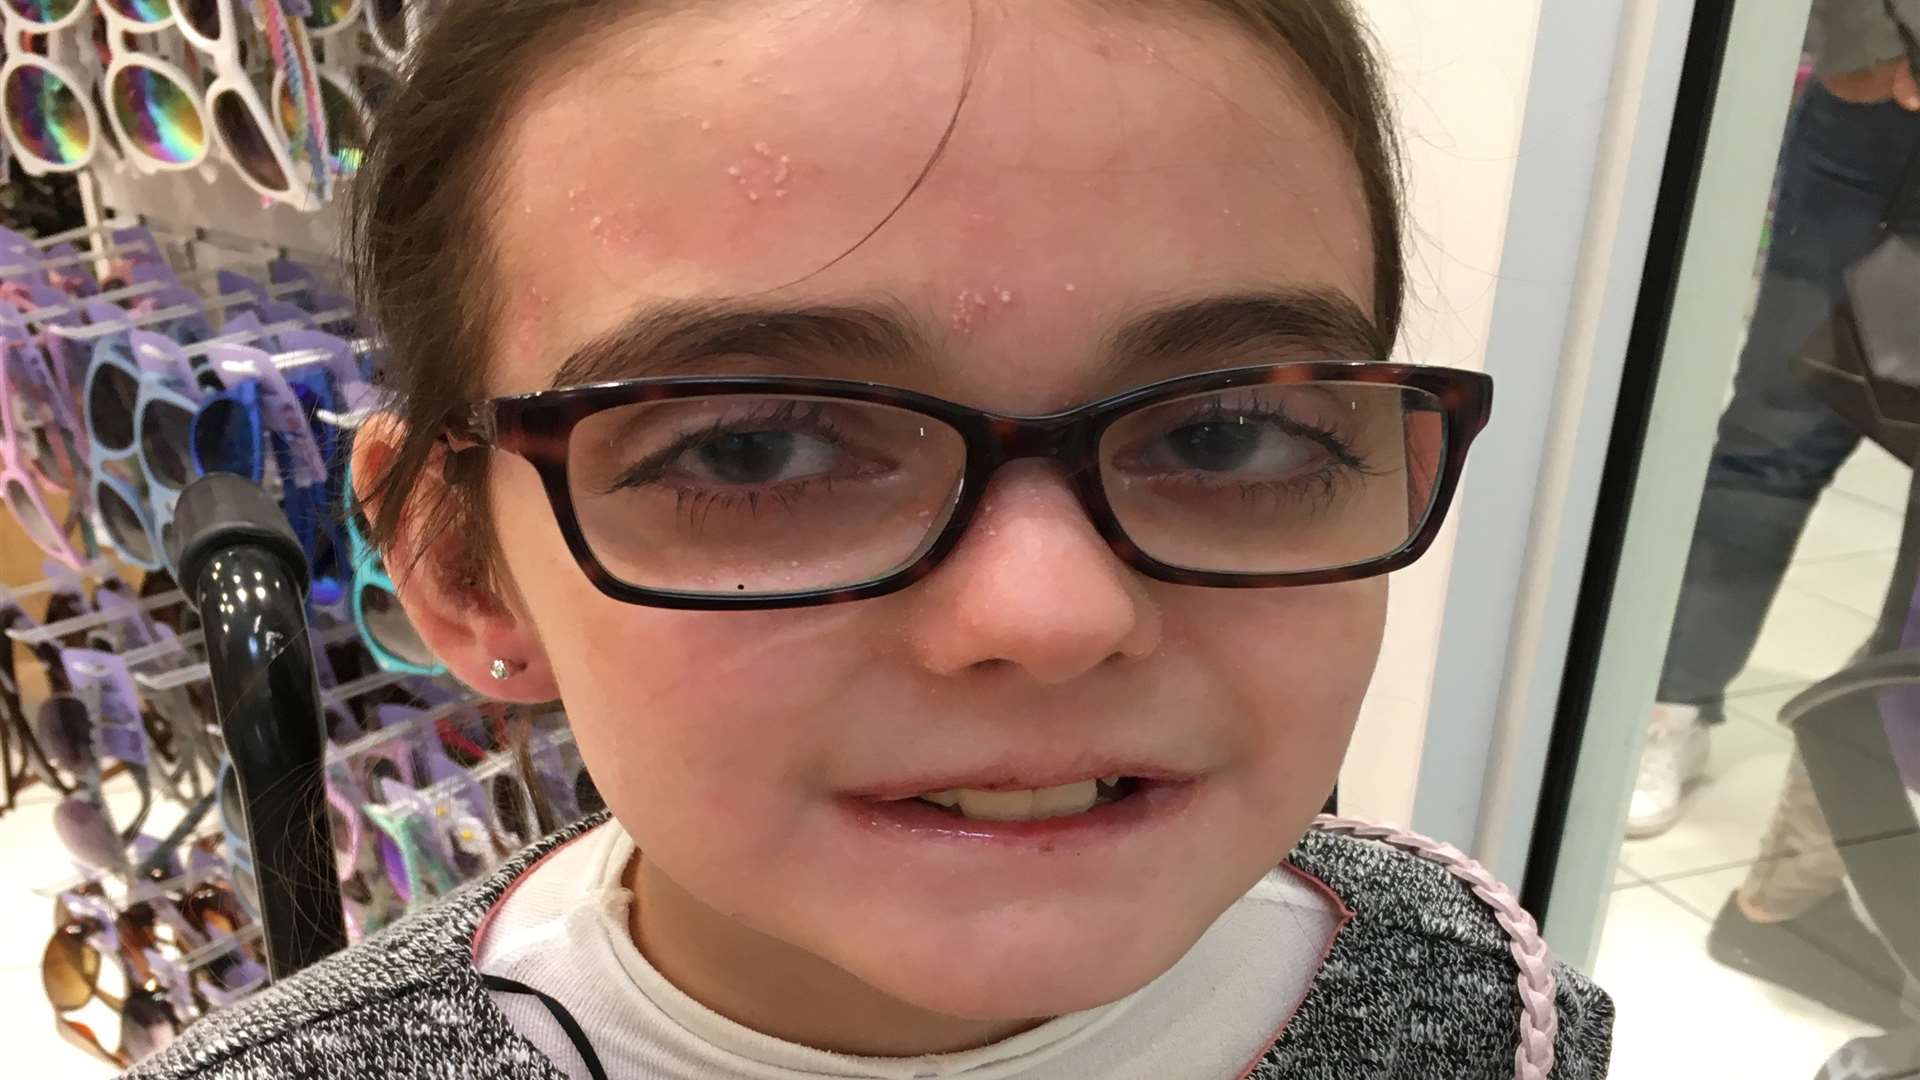 Ciara Hazel Paczensky has Epidermolysis Bullosa (EB), a genetic disorder which causes the skin to tear, rip and blister at the slightest touch